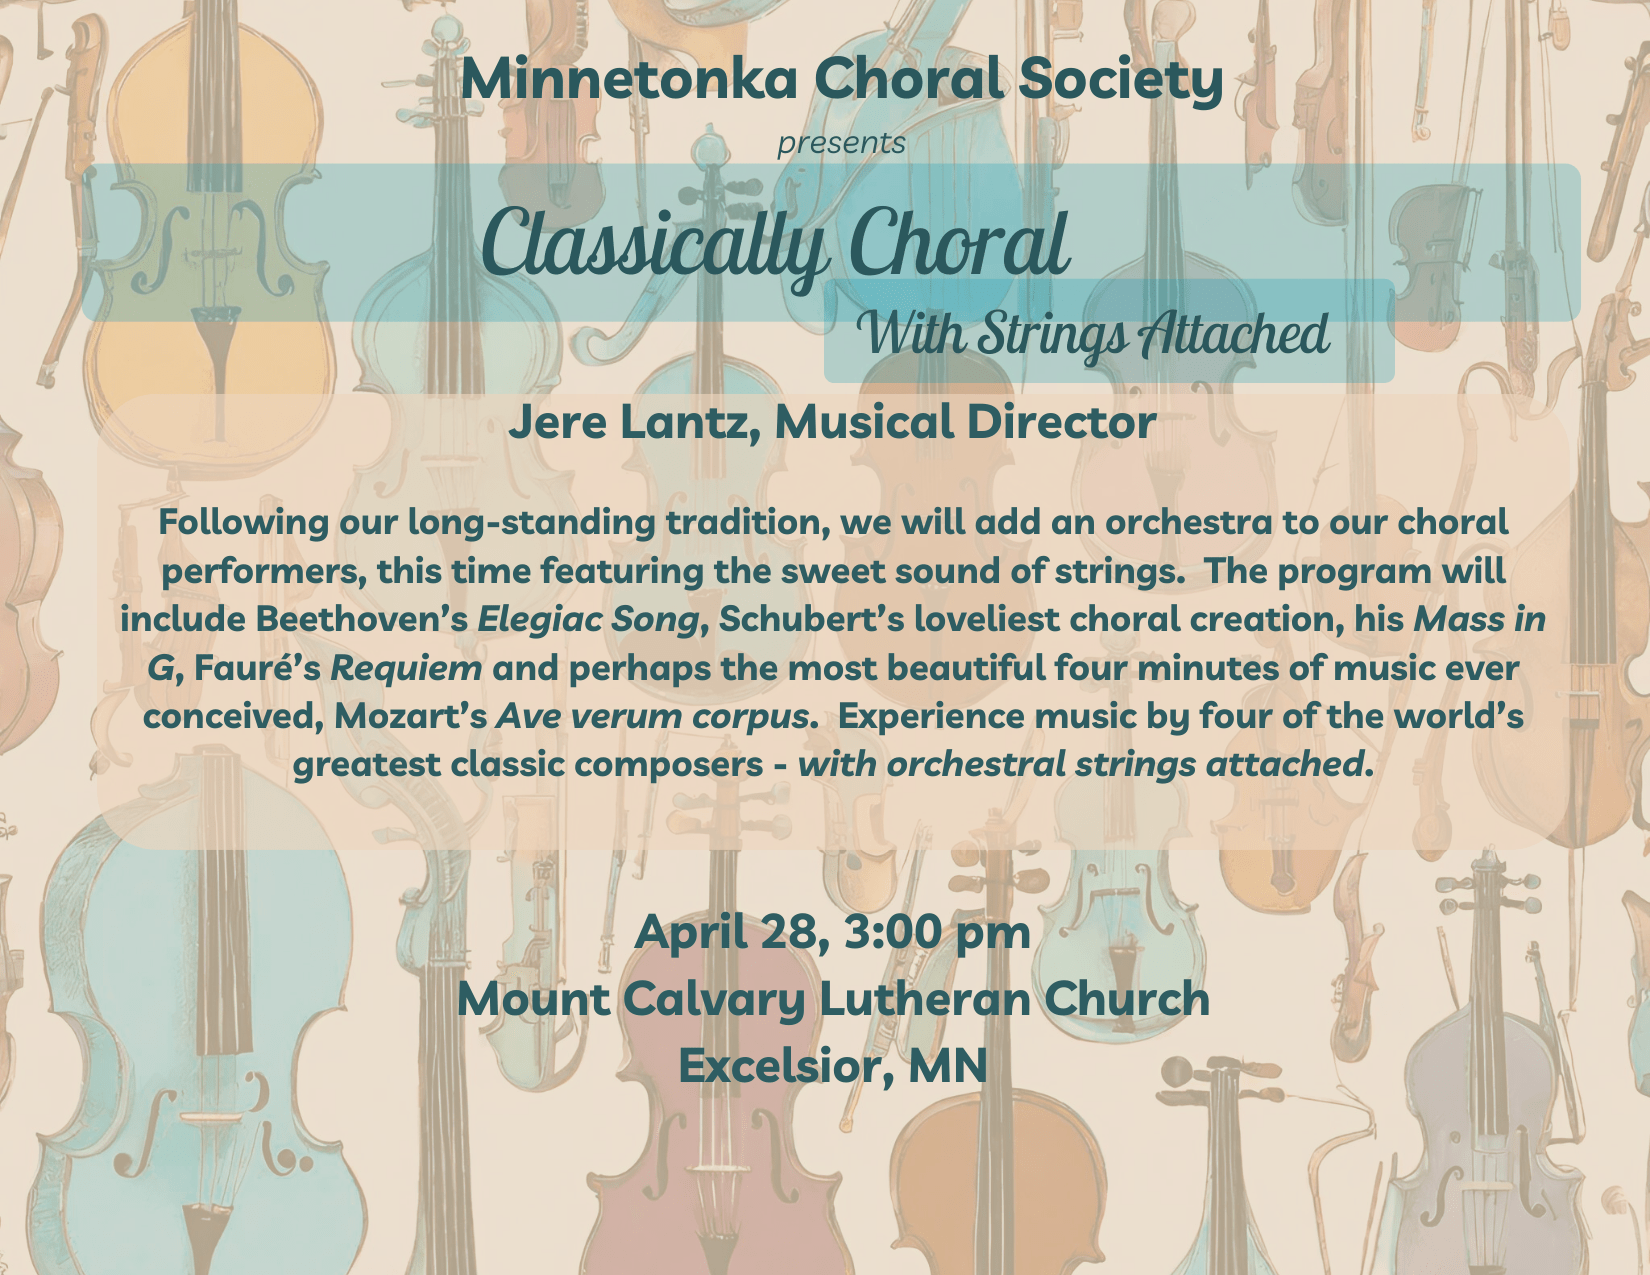 Minnetonka Choral Society to present Classically Choral - With Strings Attached Concert